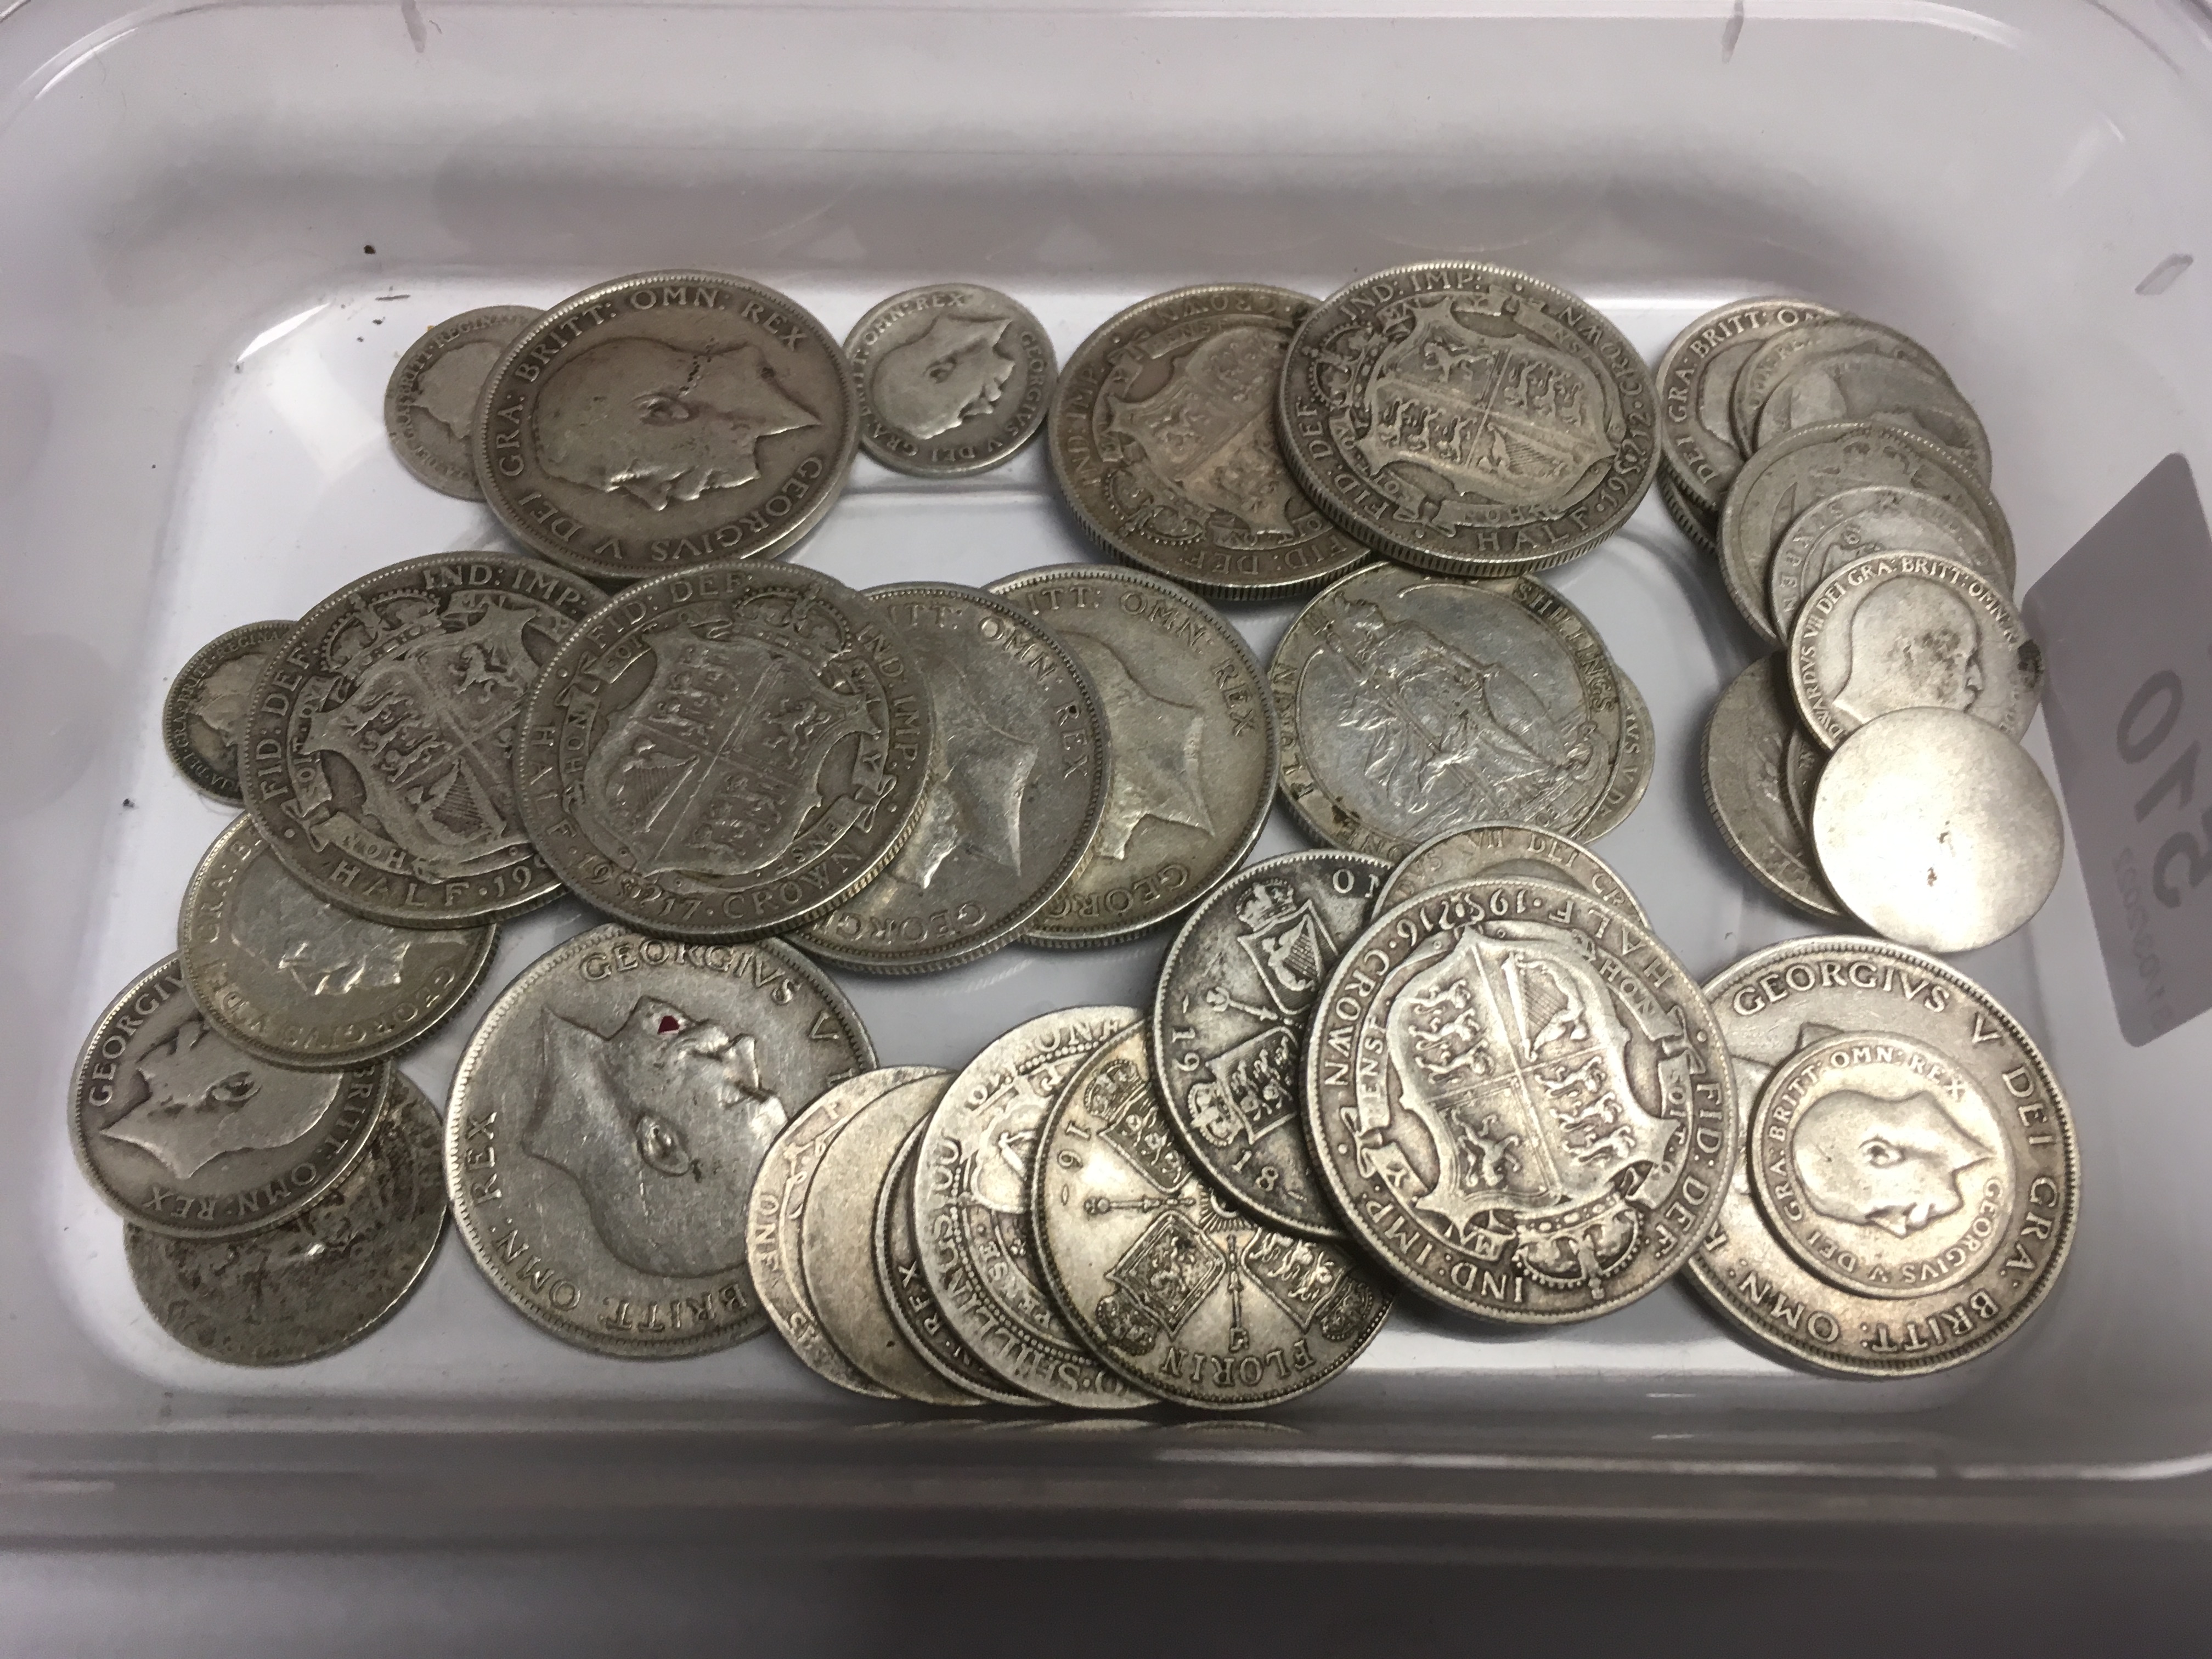 TUB OF PRE 1920 UK SILVER COINS INCLUDING 1903 FLORIN, 1906 SHILLING ETC, FACE APPROX £2.40.